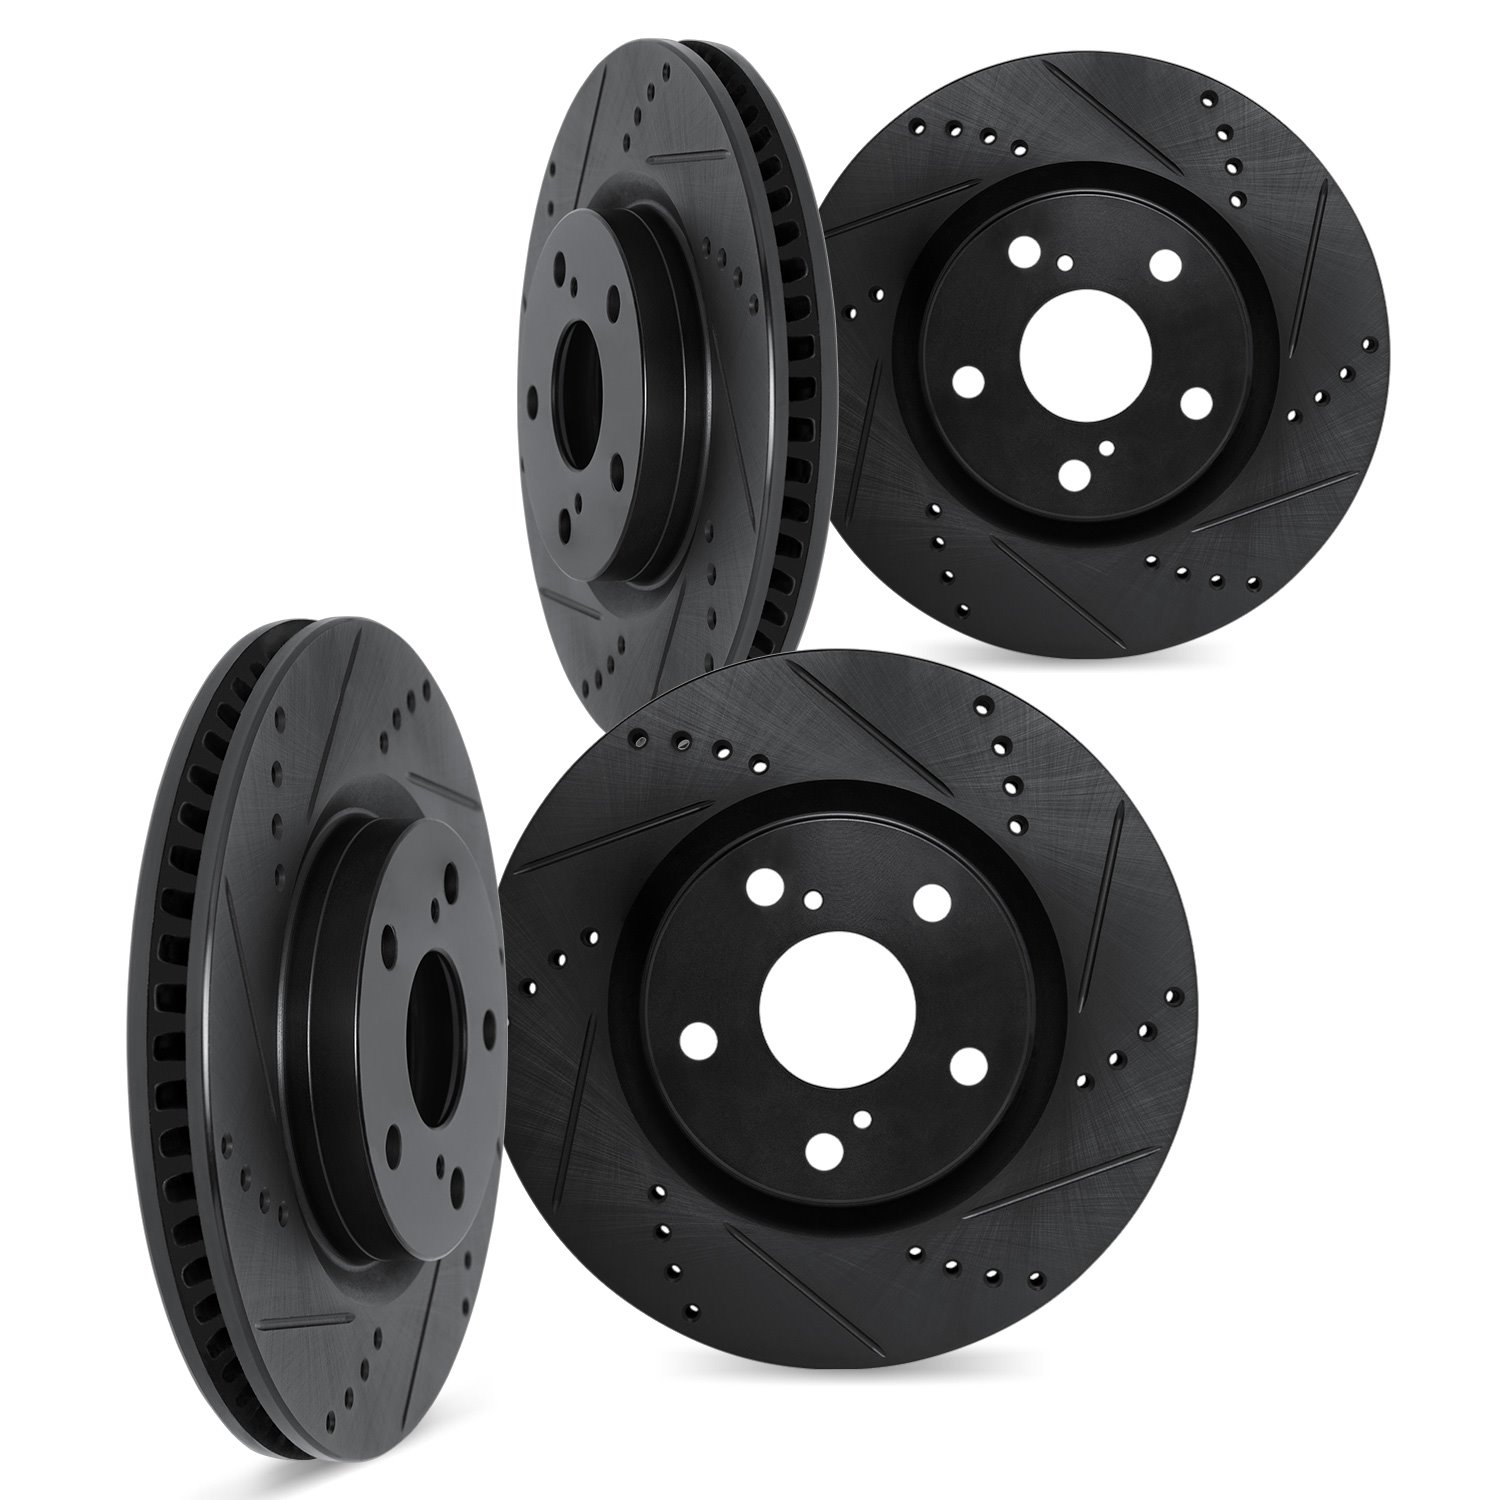 8004-46034 Drilled/Slotted Brake Rotors [Black], Fits Select GM, Position: Front and Rear